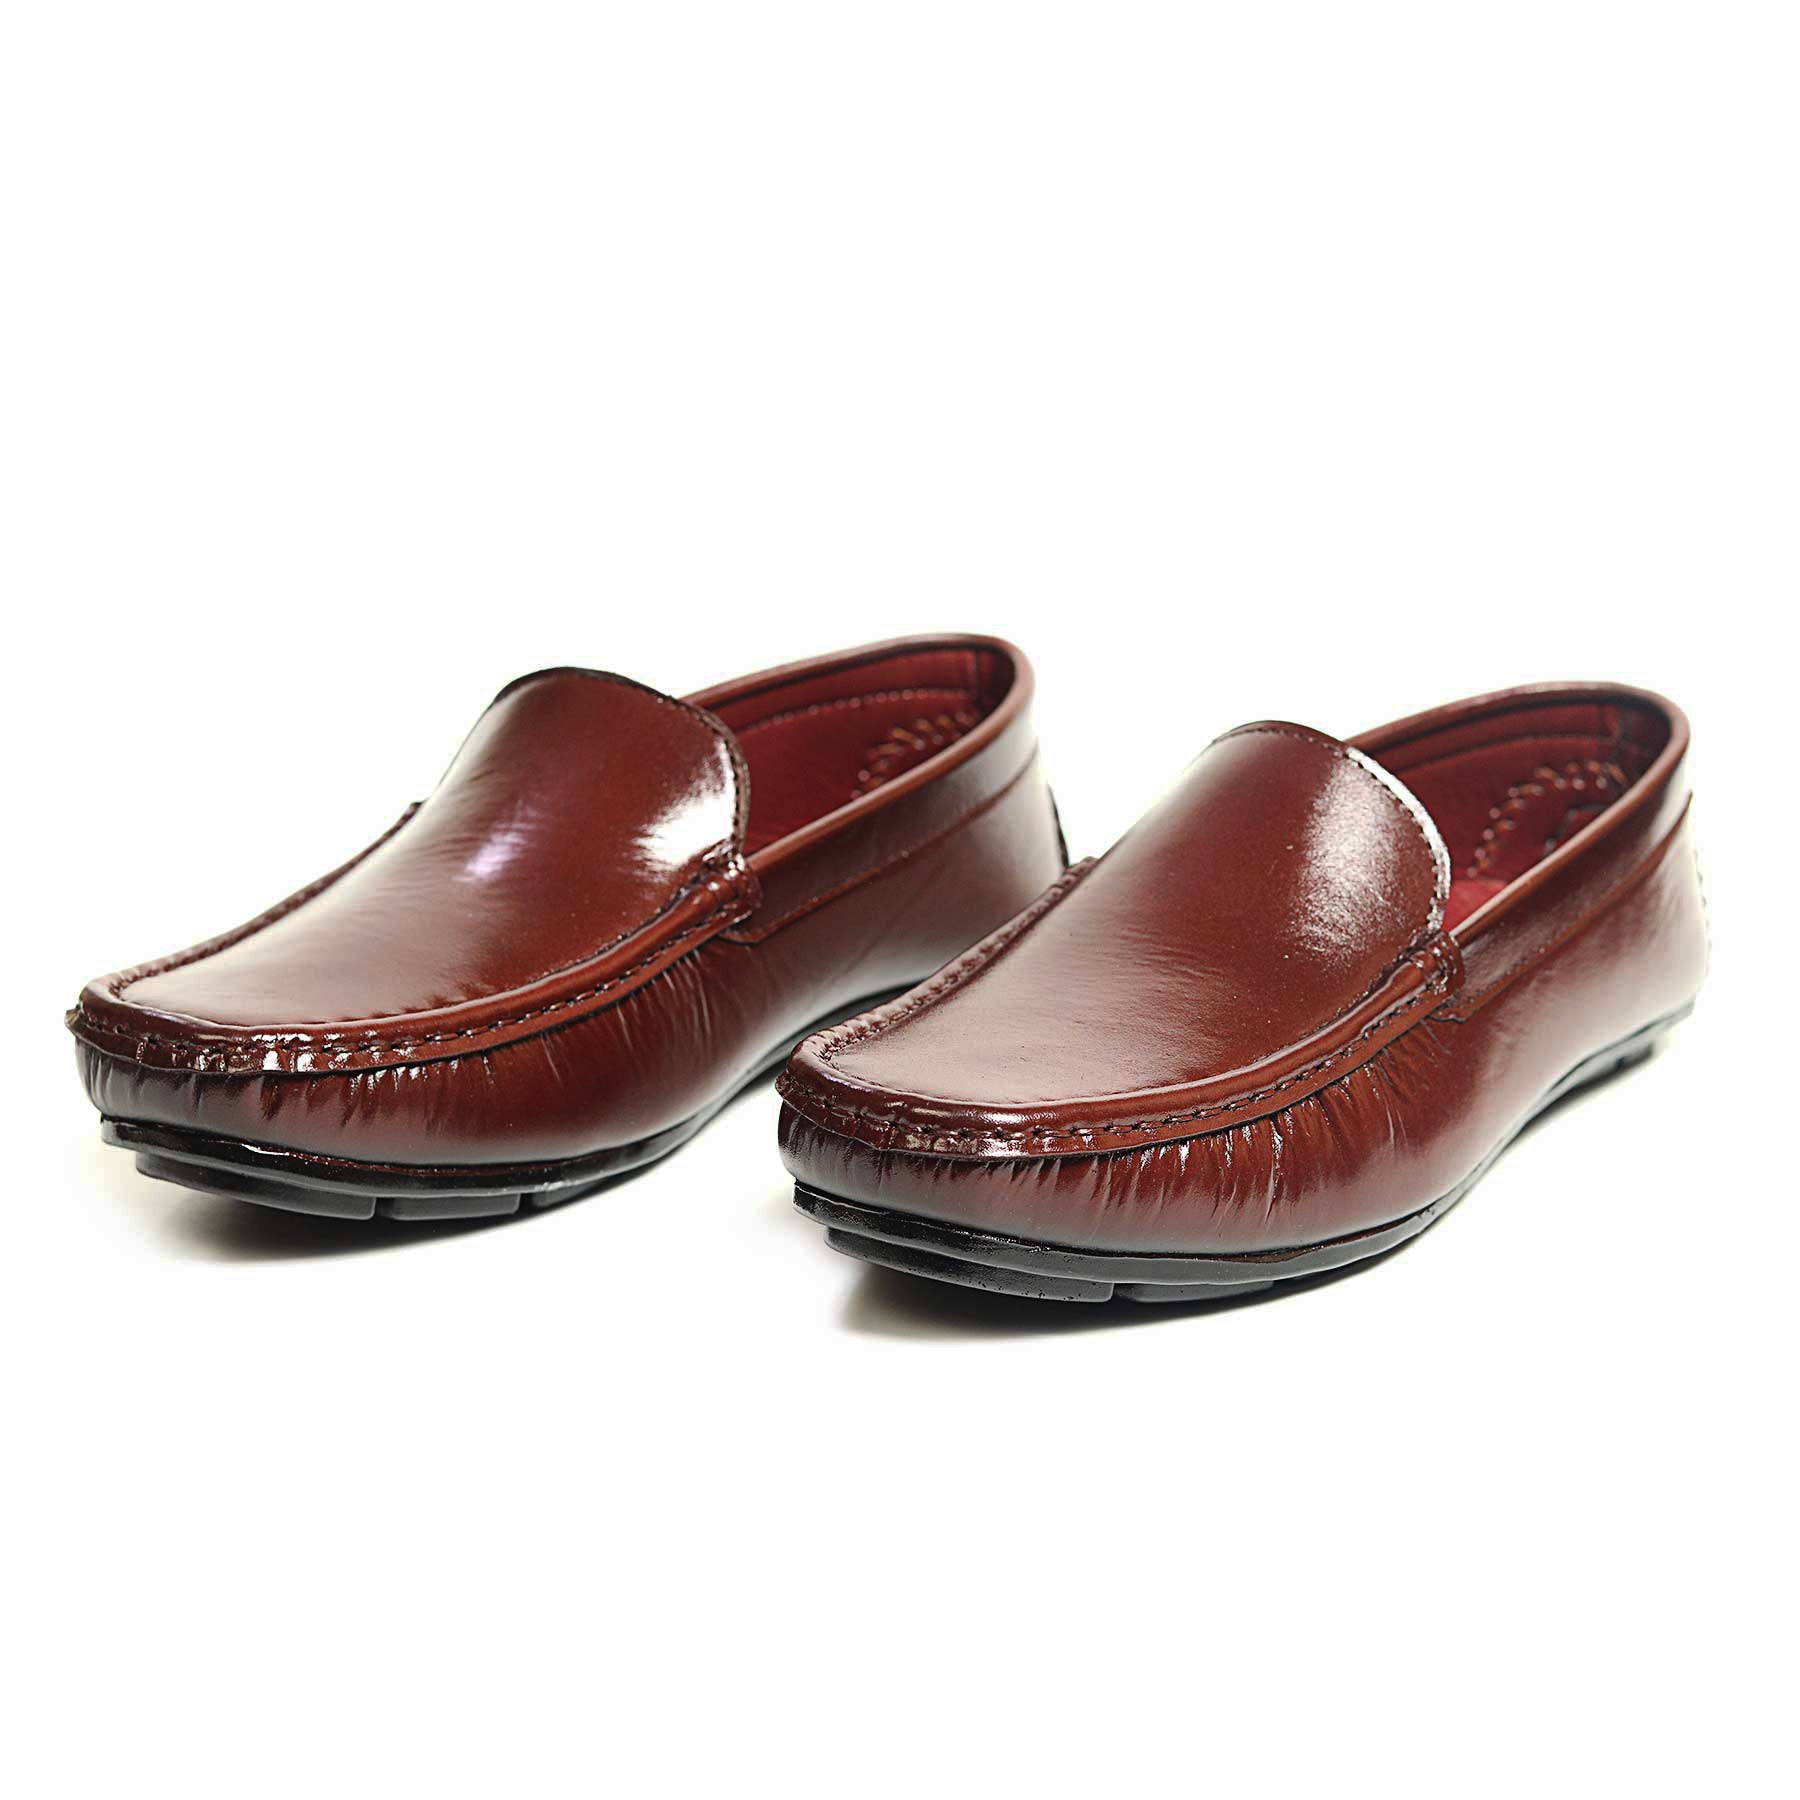 Zays Leather Premium Loafer For Men (Chocolate ) - SF82